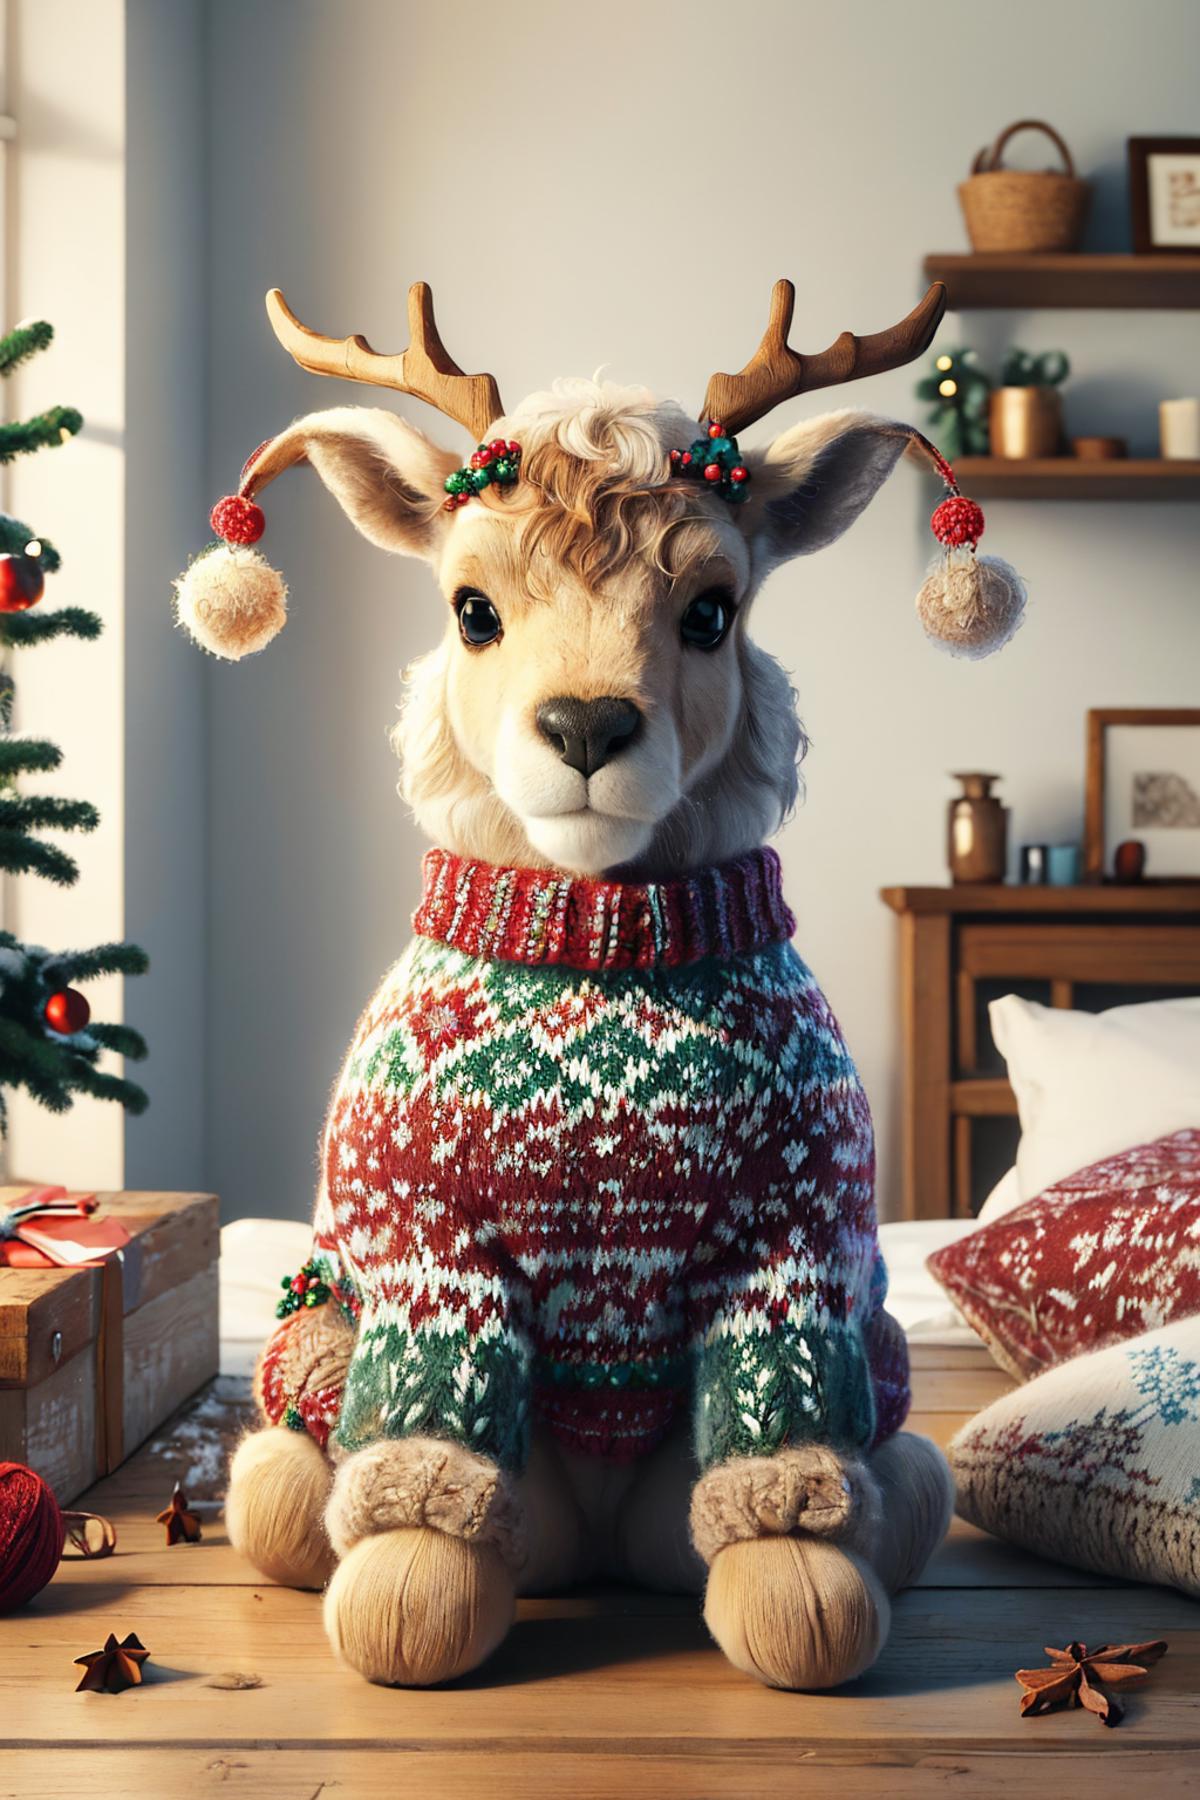 A stuffed animal wearing a Christmas sweater and antlers in front of a Christmas tree.